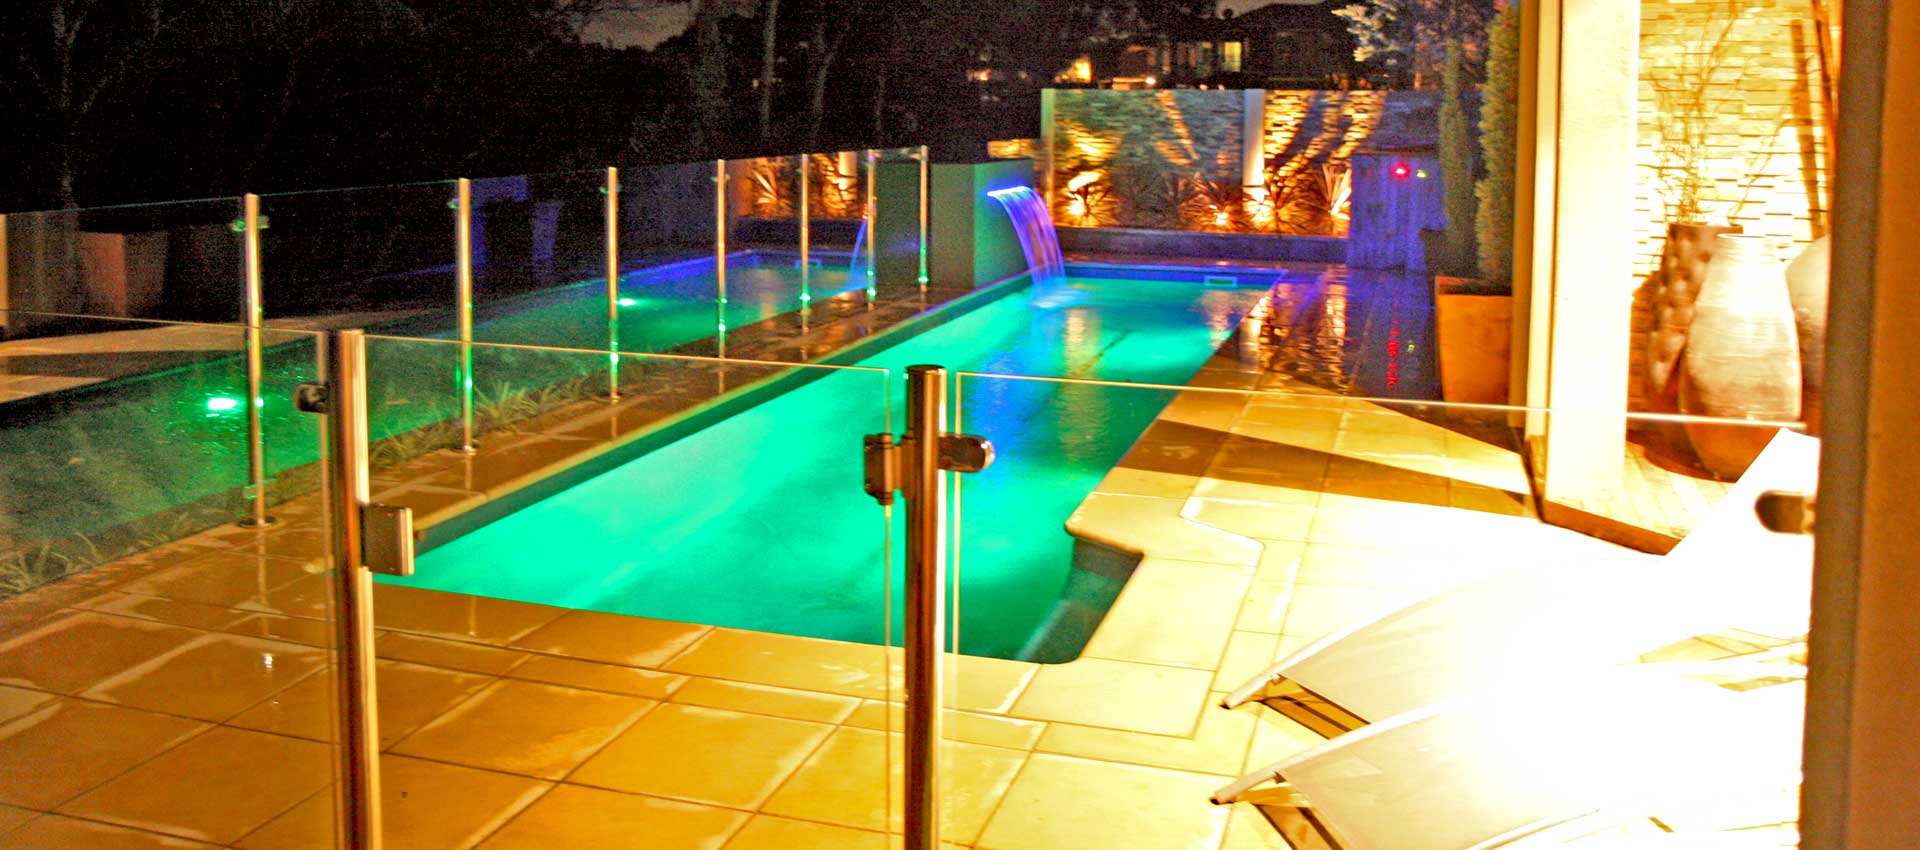 Swimming Pool - Glass Fencing